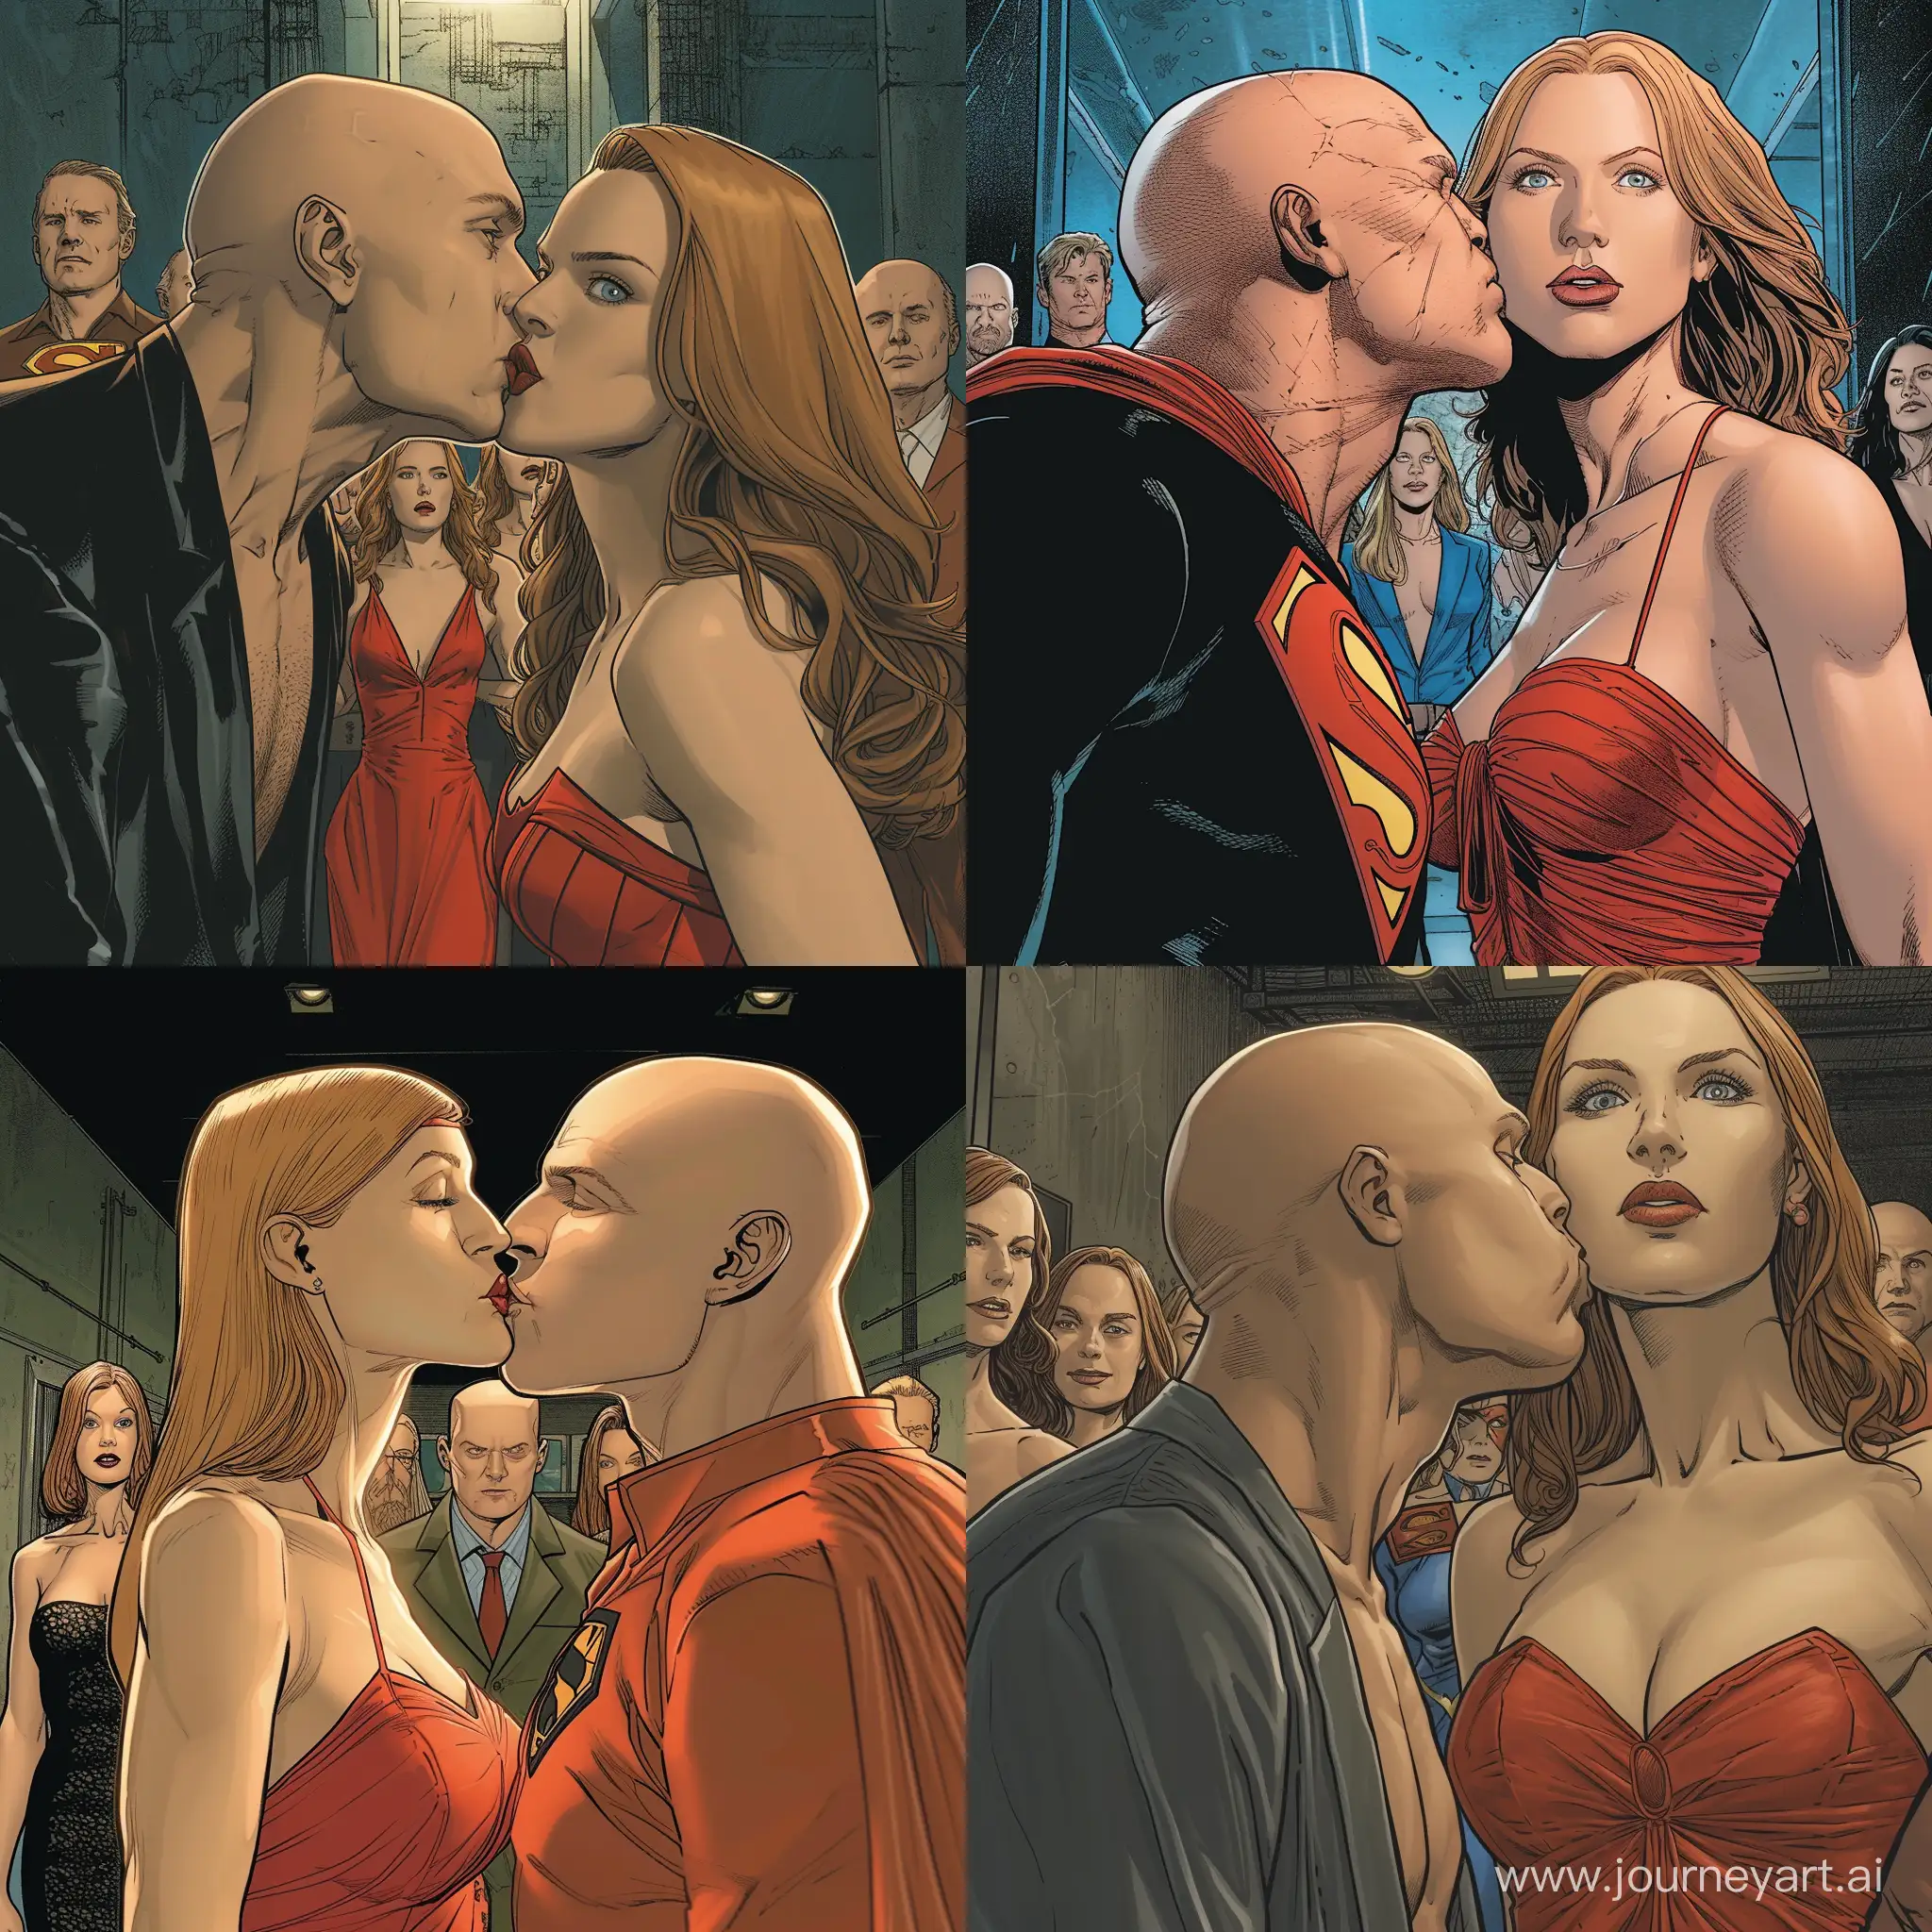 In the foreground Lex Luthor, bald kissing a woman in a red dress a woman. The woman has a light-medium golden complexion, a squared face shape, full lips, blue eyes, dirty blonde eyebrows arched toward the tail, a button nose, and long, straight strawberry blonde hair with wispy bangs. in the background, Martha Kent+, Jonathan Kent +, Clark Kent +, Lois Lane +, Chloe Sullivan+, and Kara Zor-El + are all watching in horror. In Jim Lee style art.